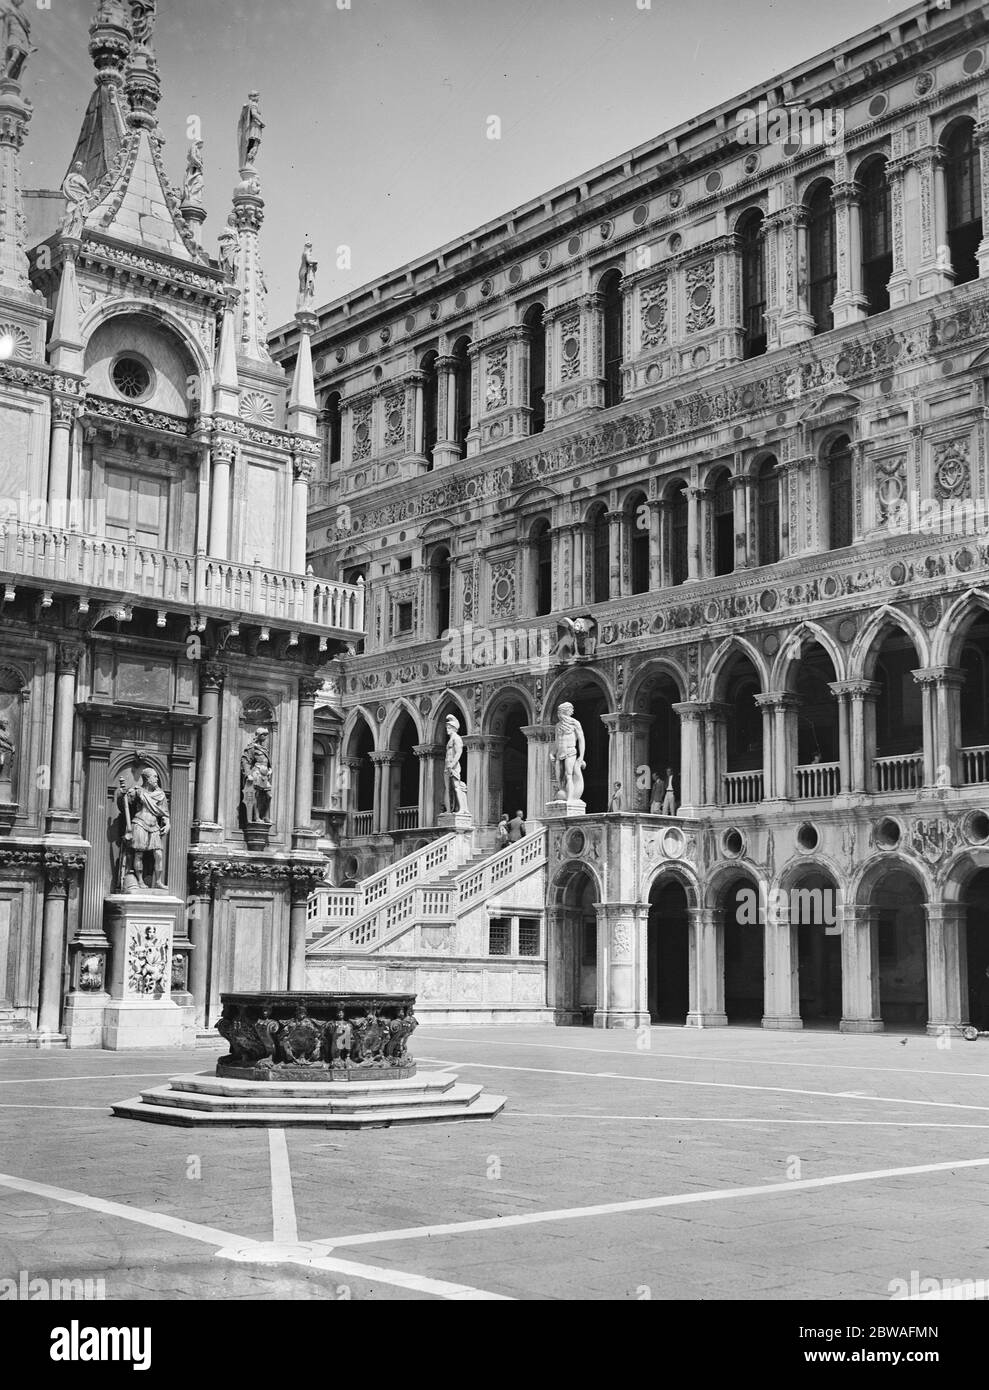 Venice Italy Portion of courtyard Doges Palace Stock Photo